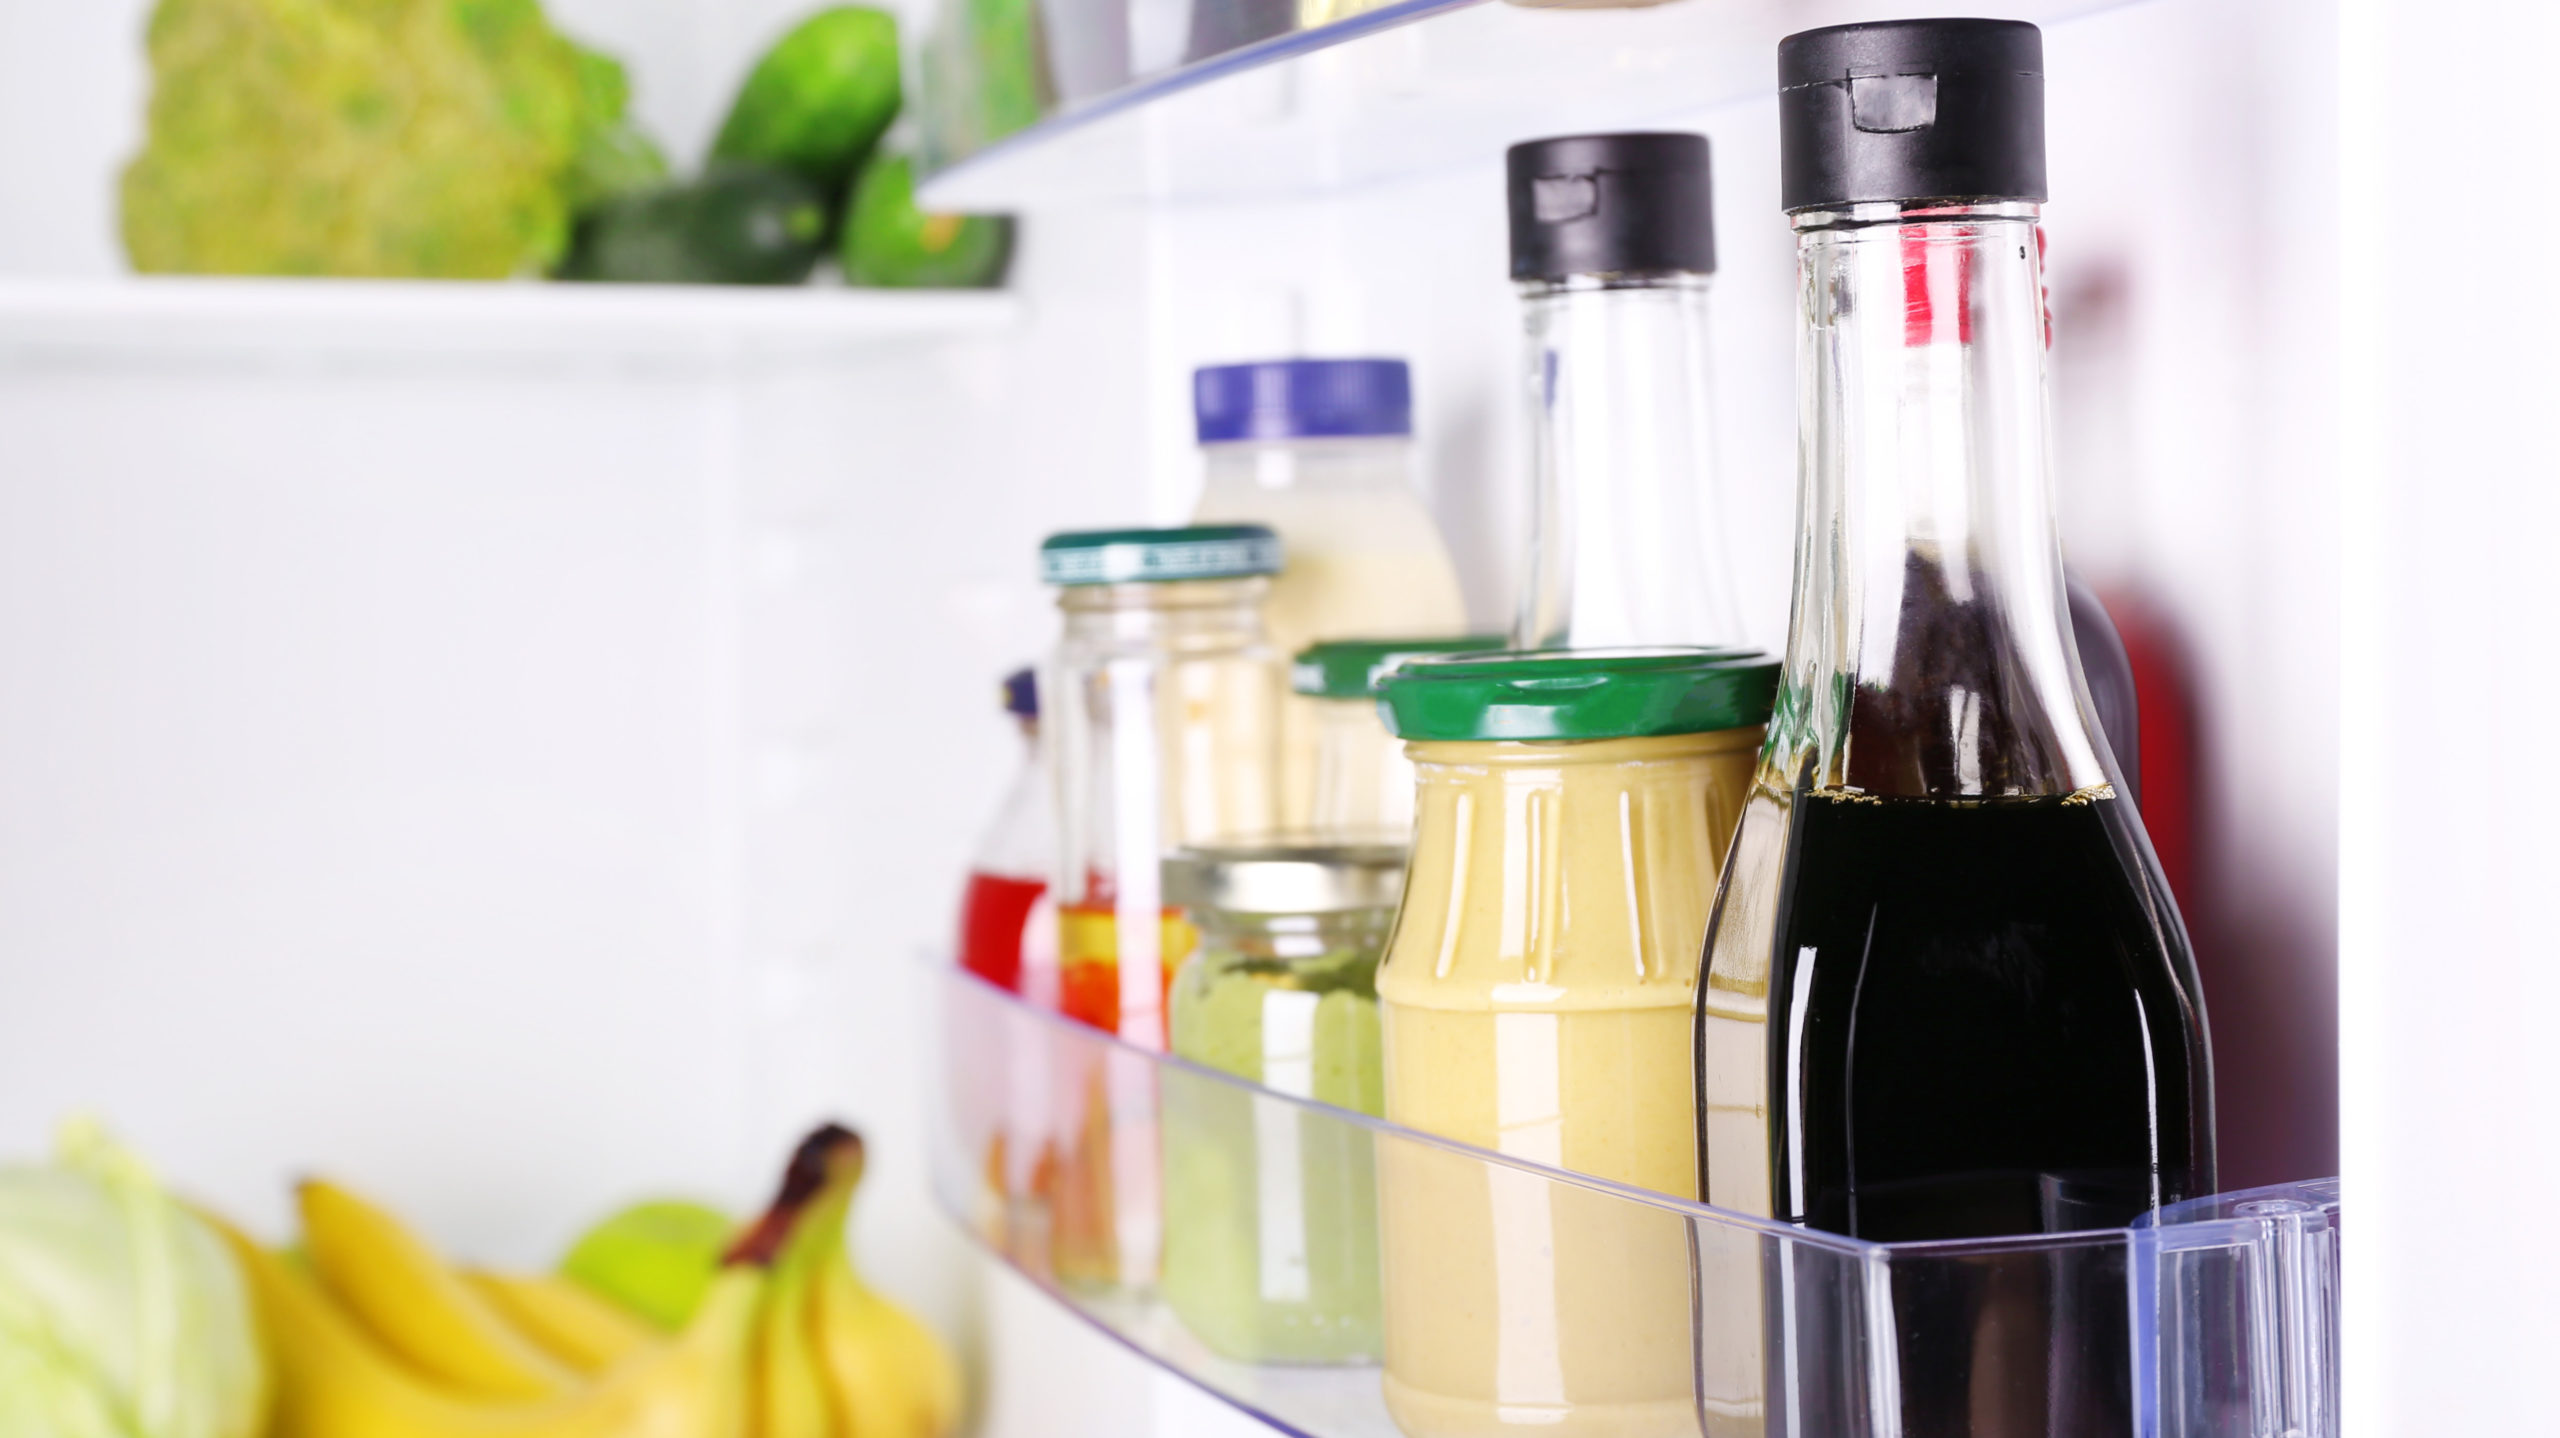 What to Keep in the Door of Your Refrigerator